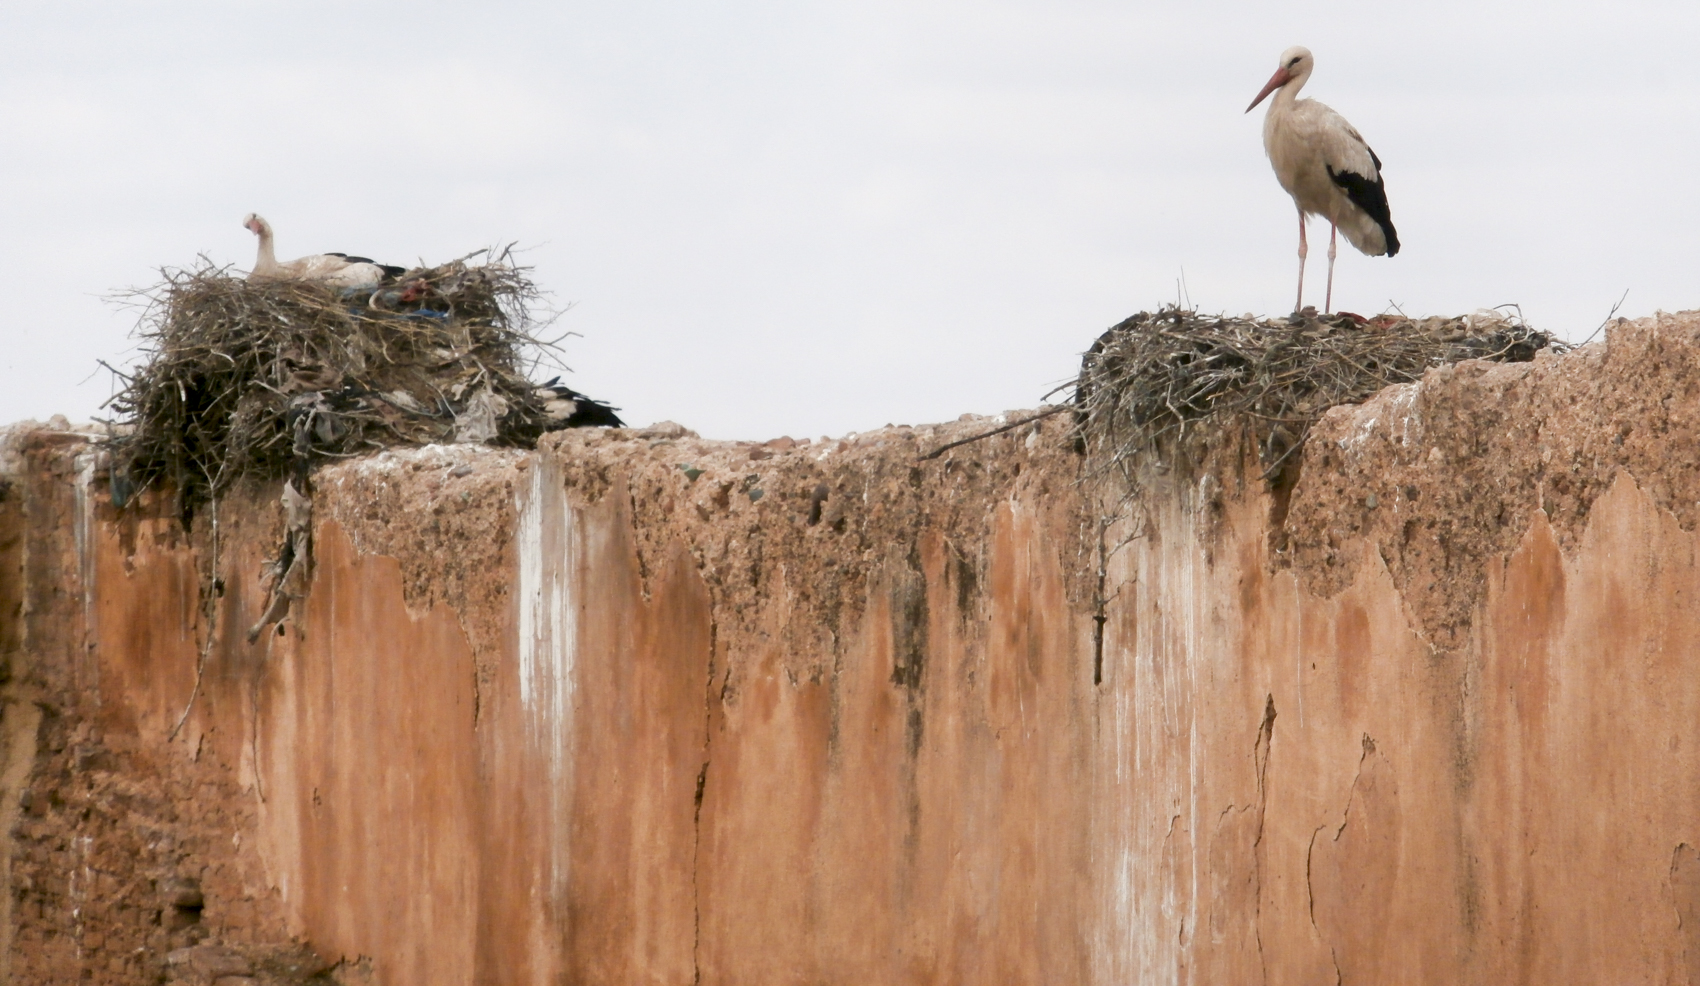 Storks roosting at El Badii Palace where the MMPVA is currently "camping"